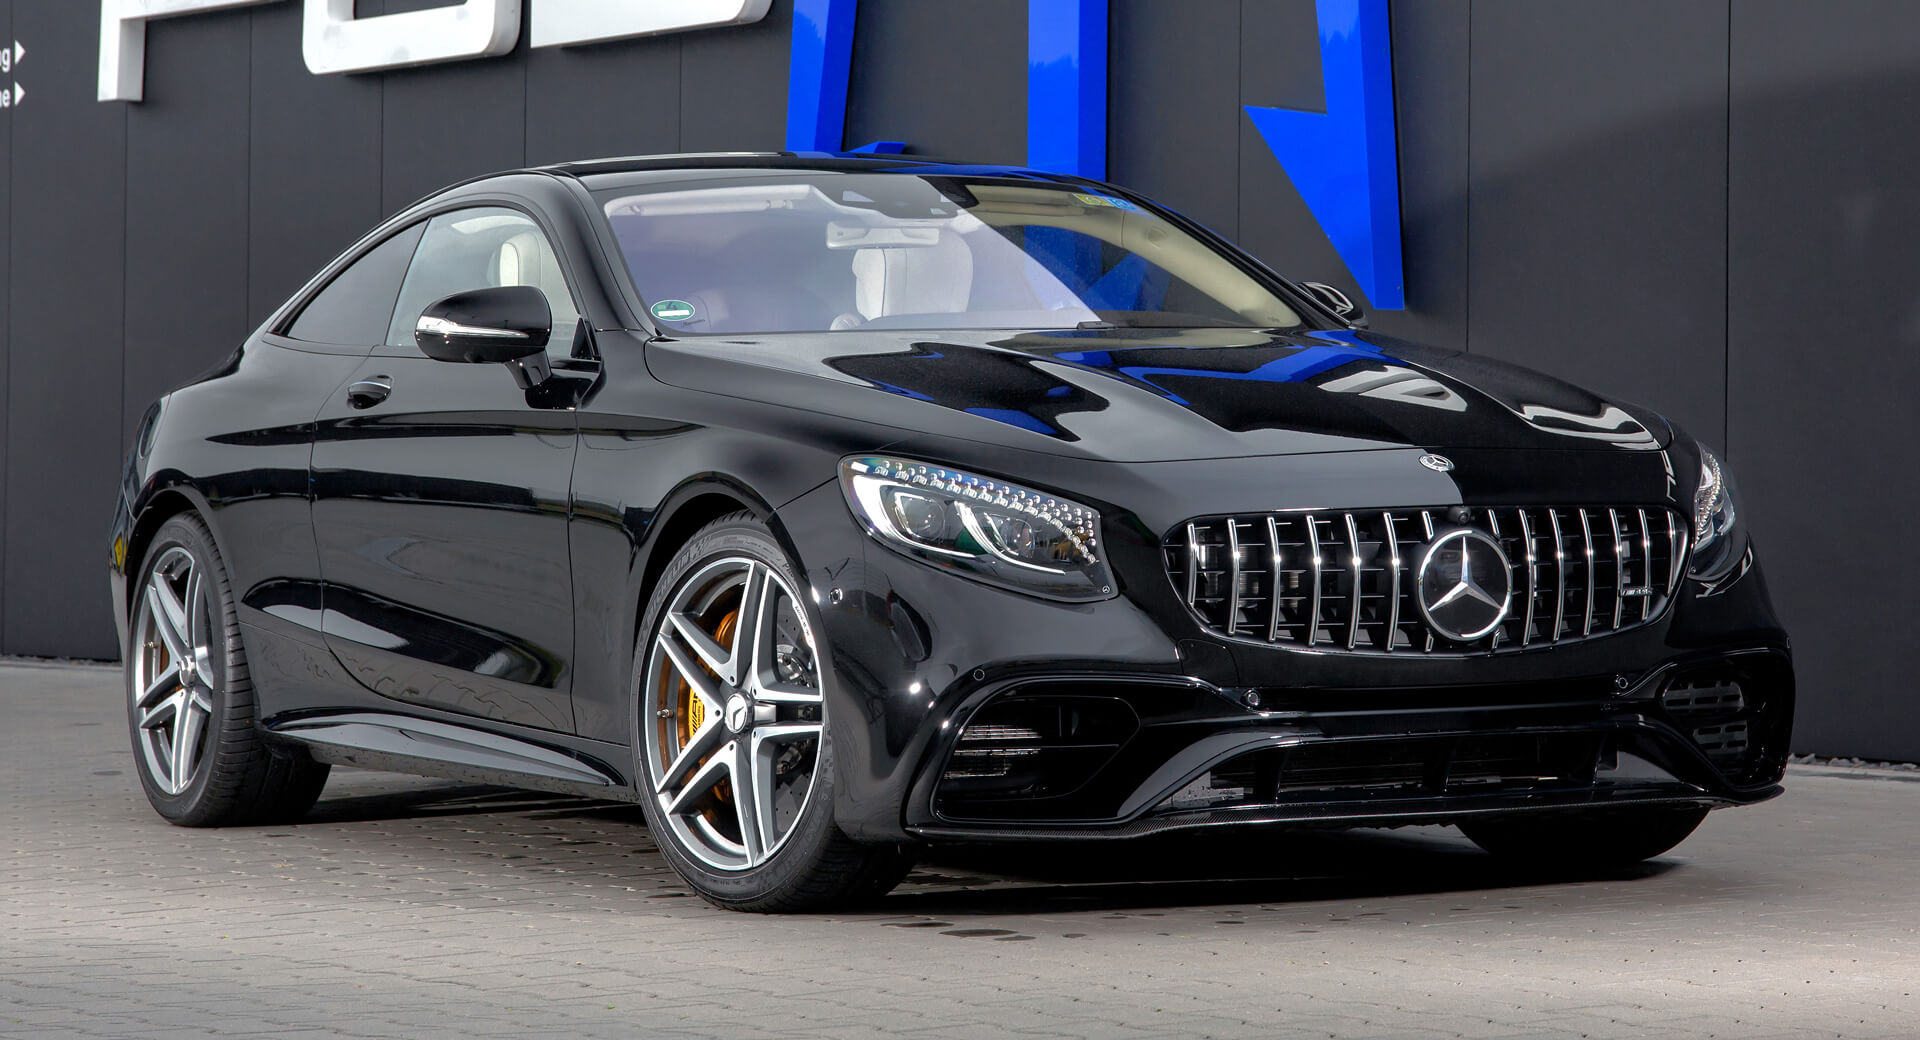 Posaidon Turns The MercedesAMG S63 Coupe Into A 927 HP Beast Carscoops